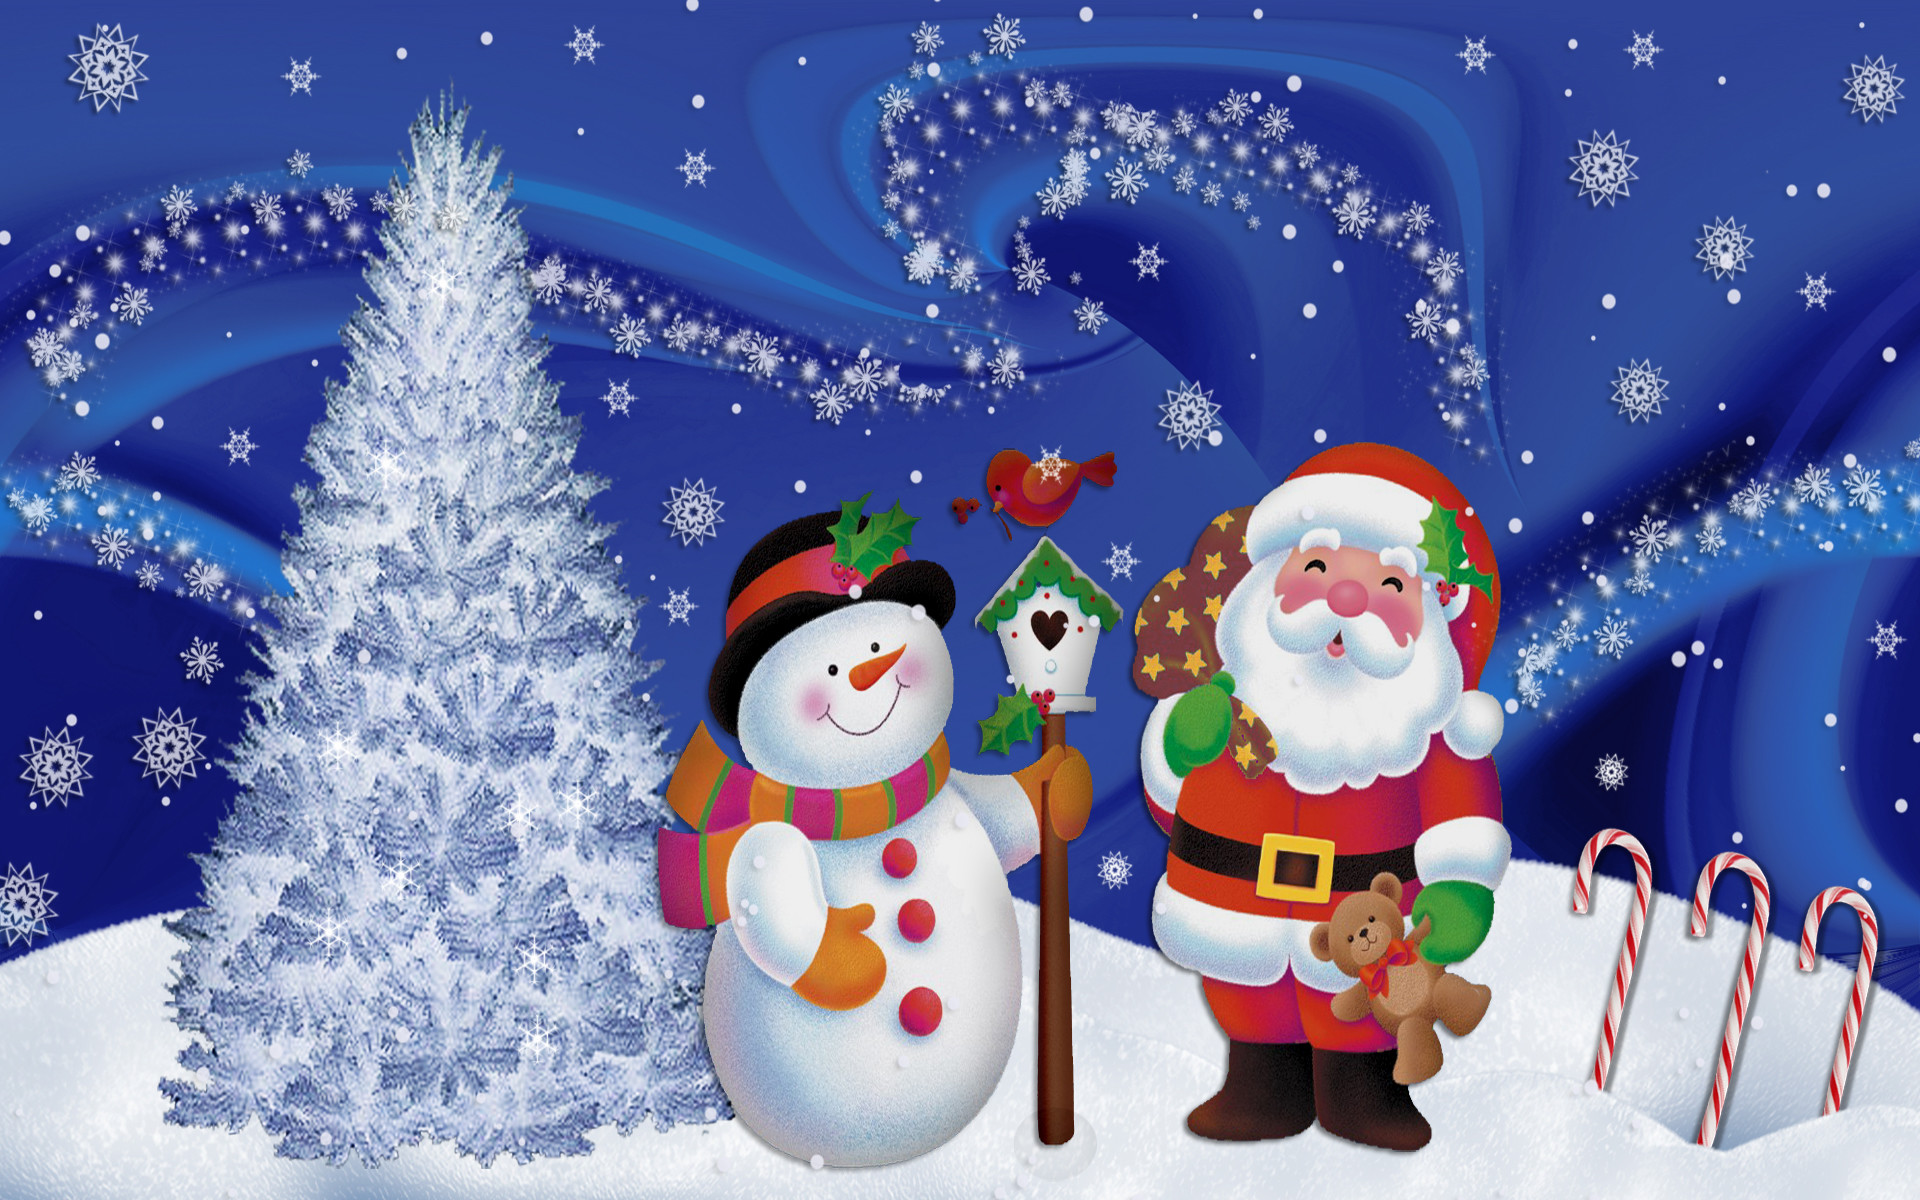 Christmas pictures Merry Christmas – Christmas Wallpaper 32789995 – Fanpop fanclubs